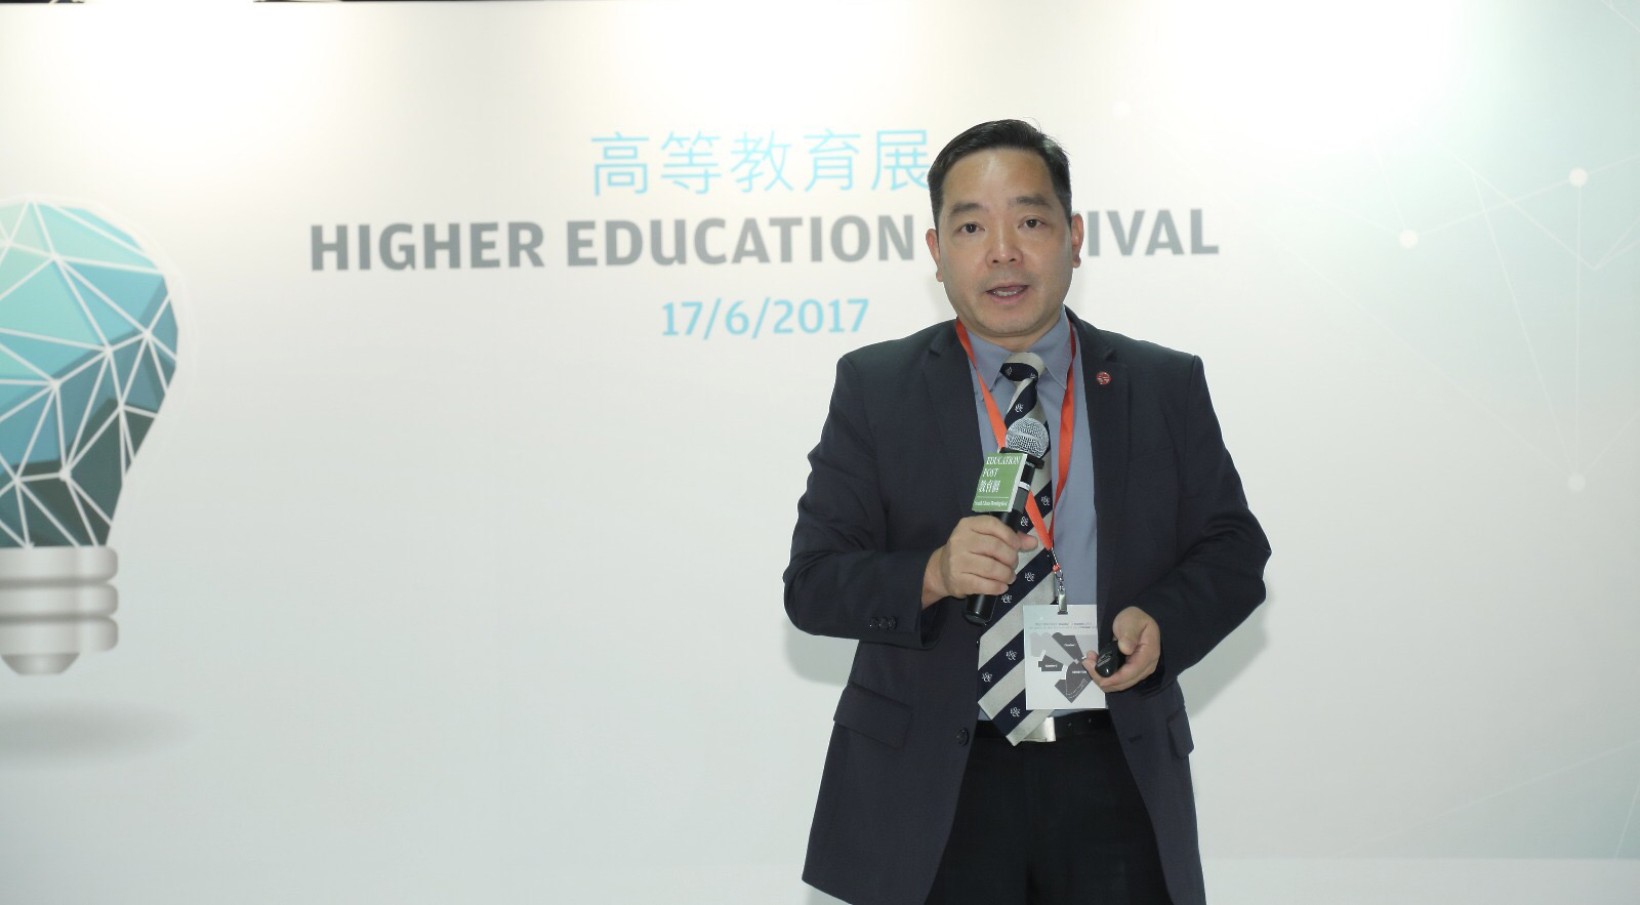 Vice-President introduces liberal arts education at Higher Education Festival